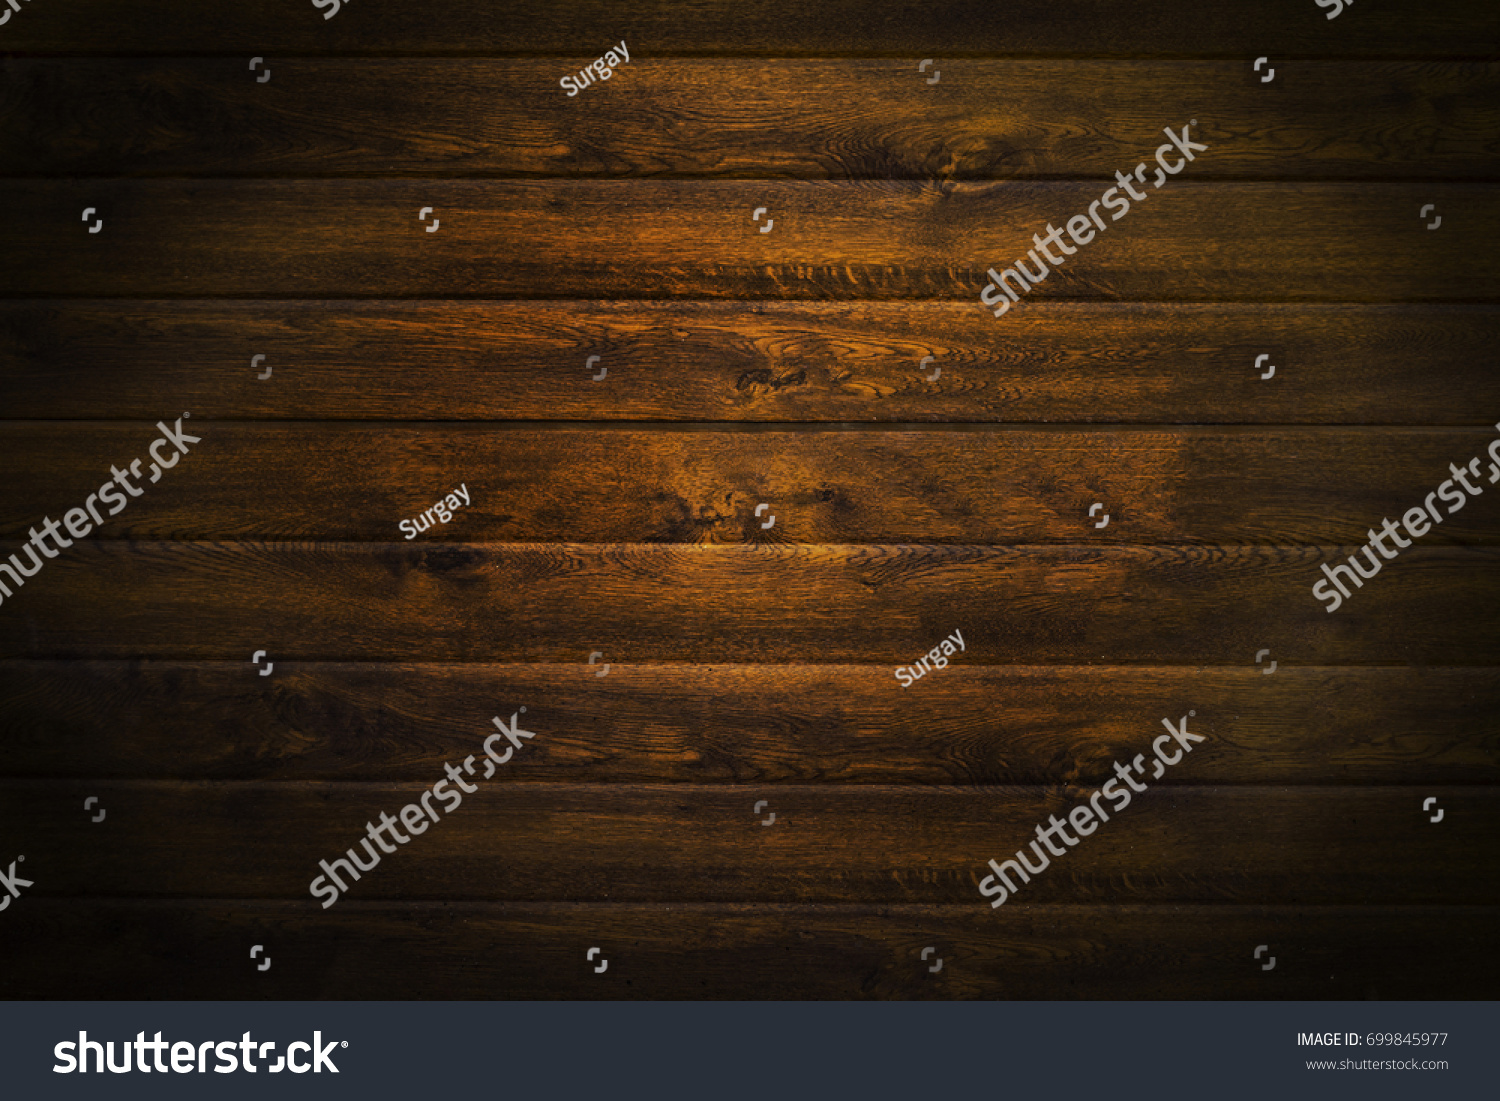 Beautiful image of a wooden wall #699845977